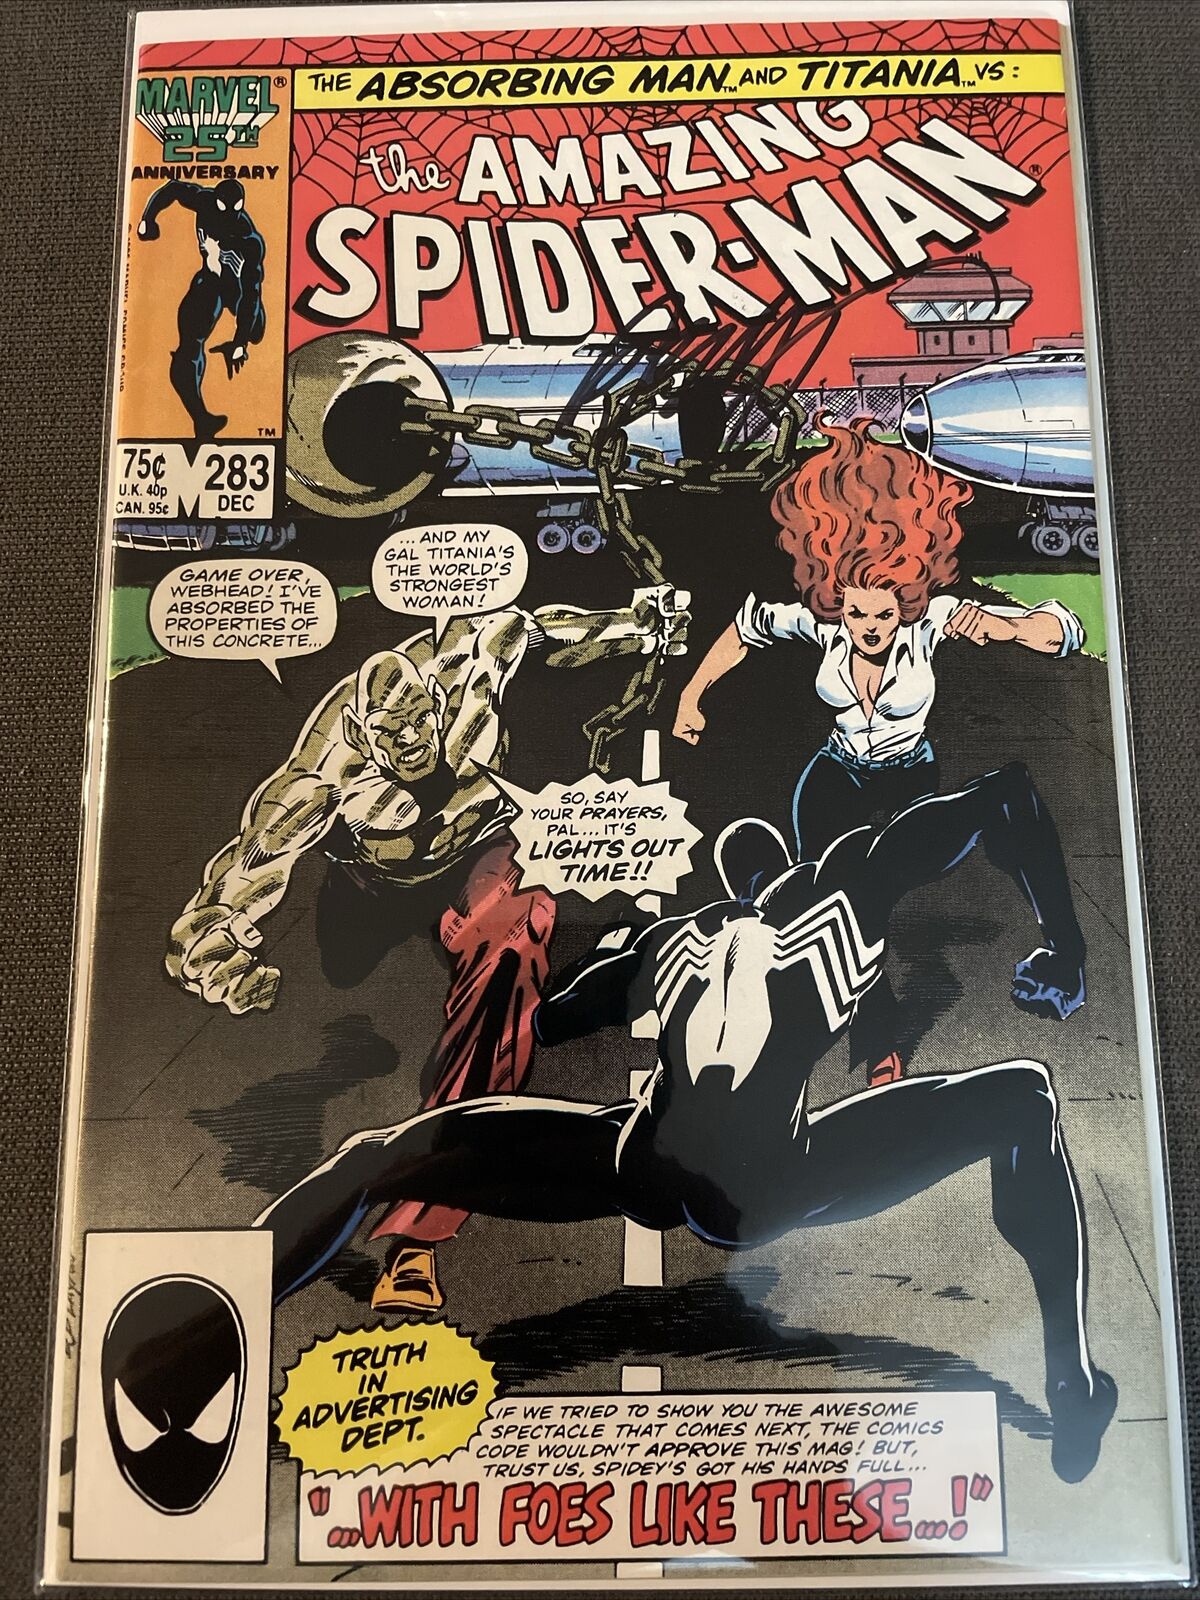 Marvel - THE AMAZING SPIDER-MAN #283 *SIGNED* by Bob Layton (Great Condition)